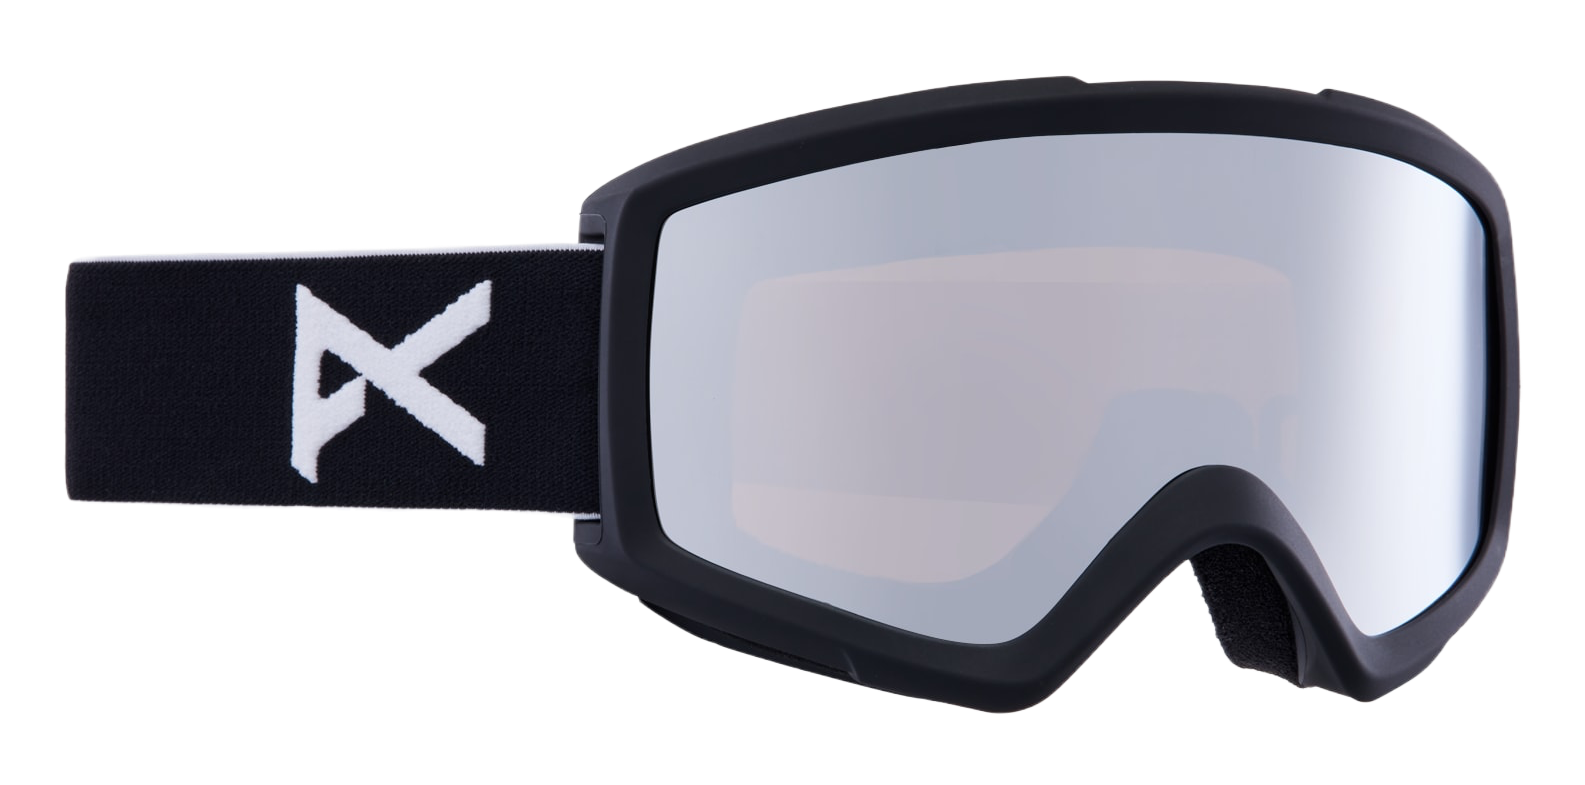 ANON Helix 2.0 goggles - Black w/ Silver Amber